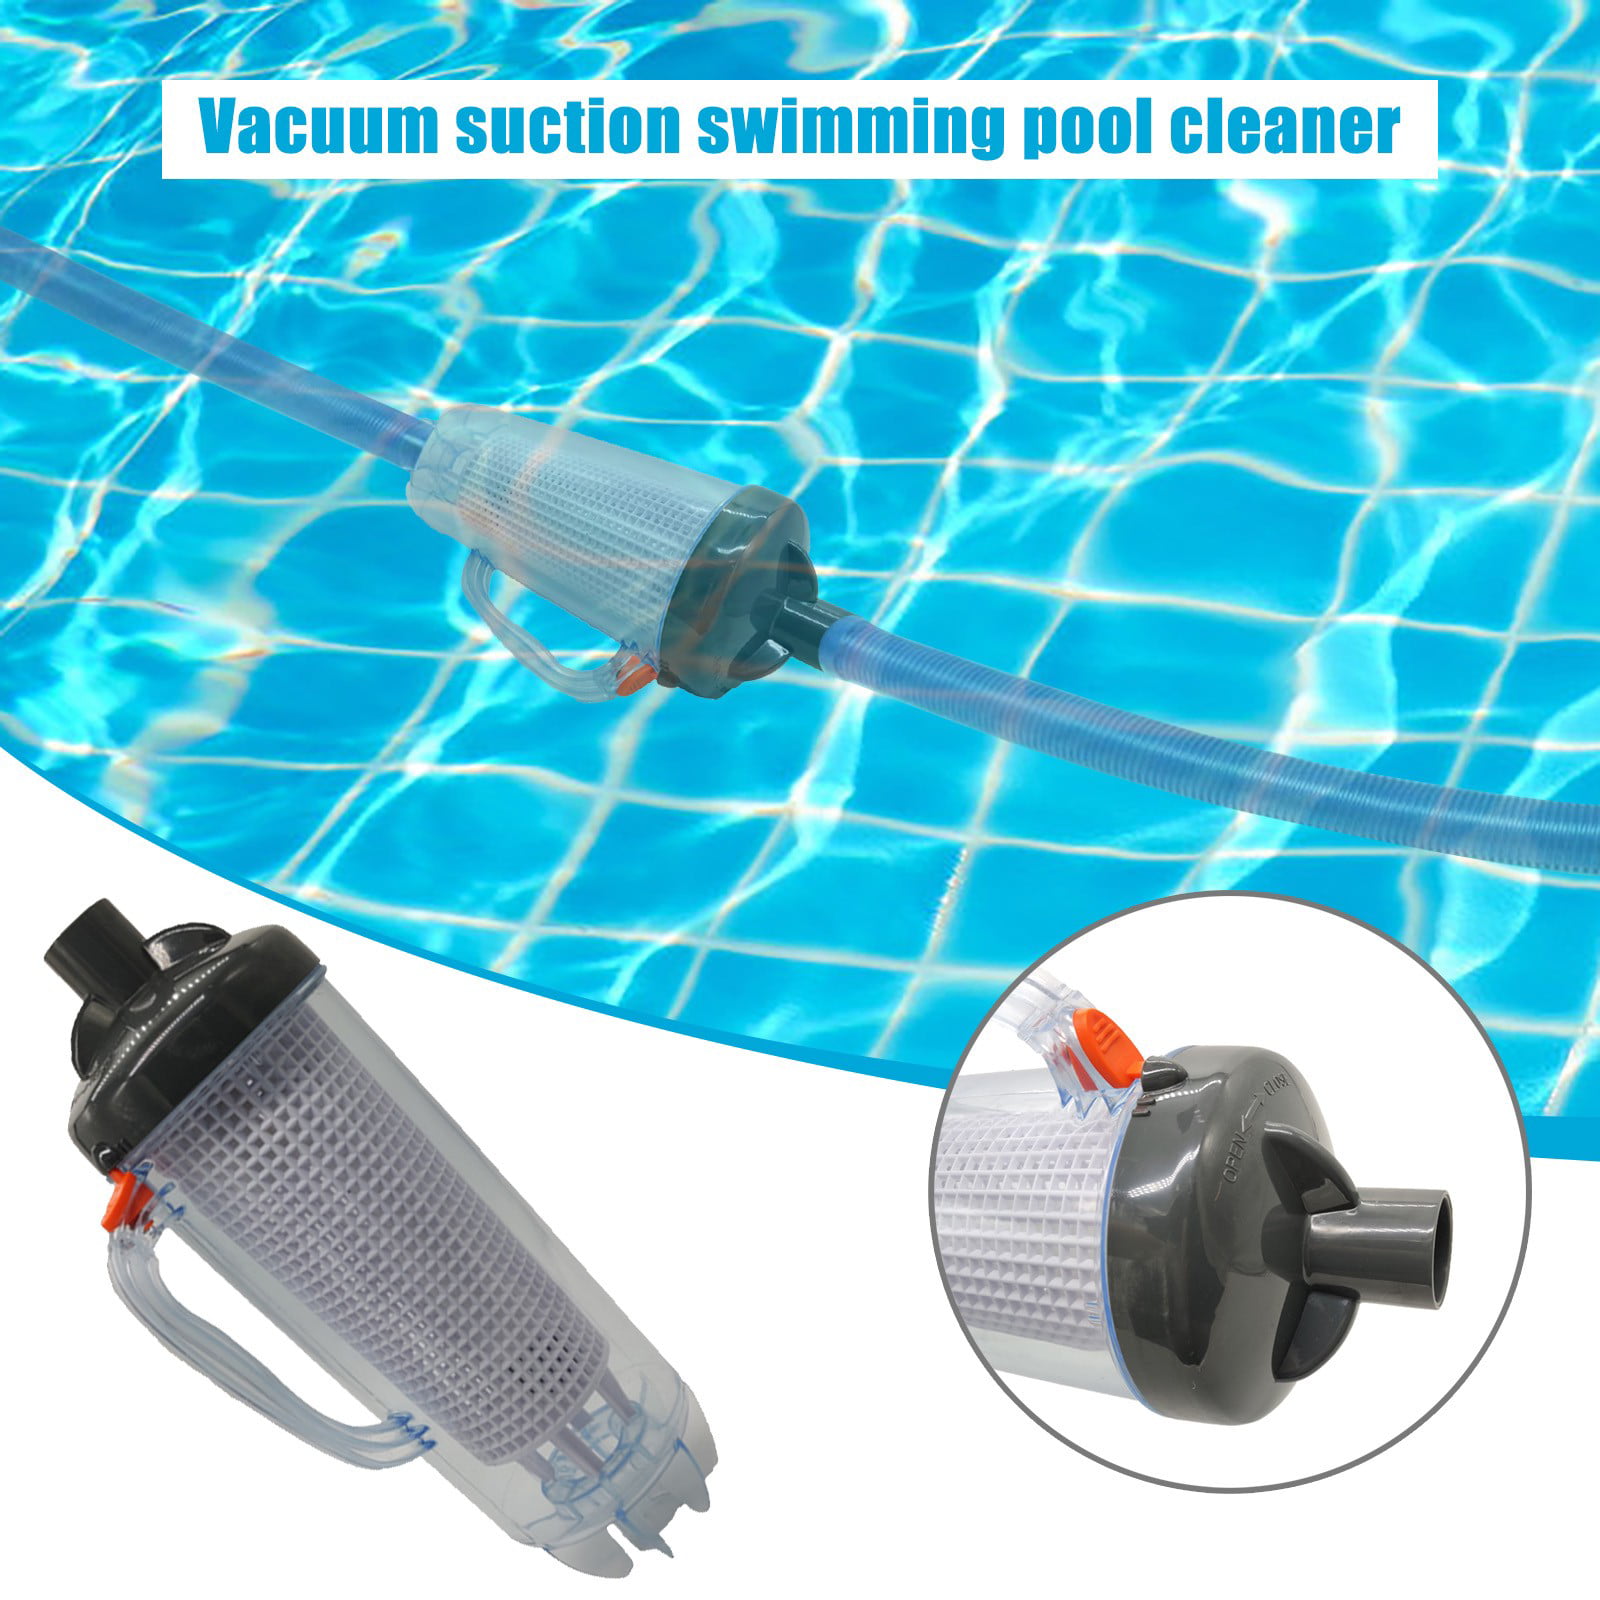 Details about   Standard Swimming Pool Leaf Trap Canister W/Basket for Automatic Pool Cleaner 